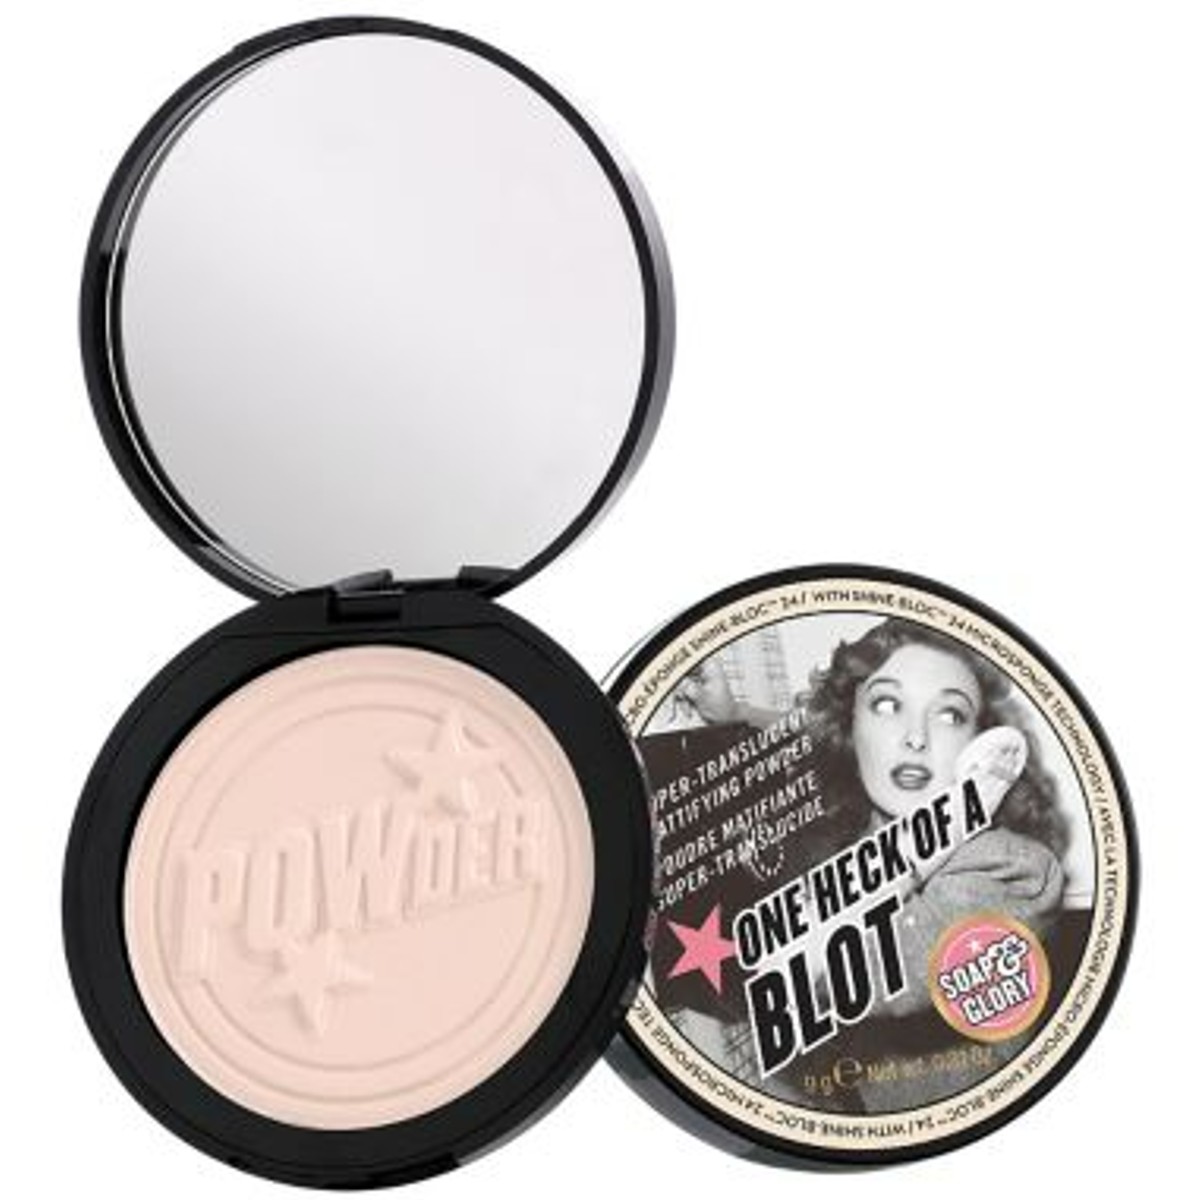 One Heck Of A Blot Translucent Face Powder